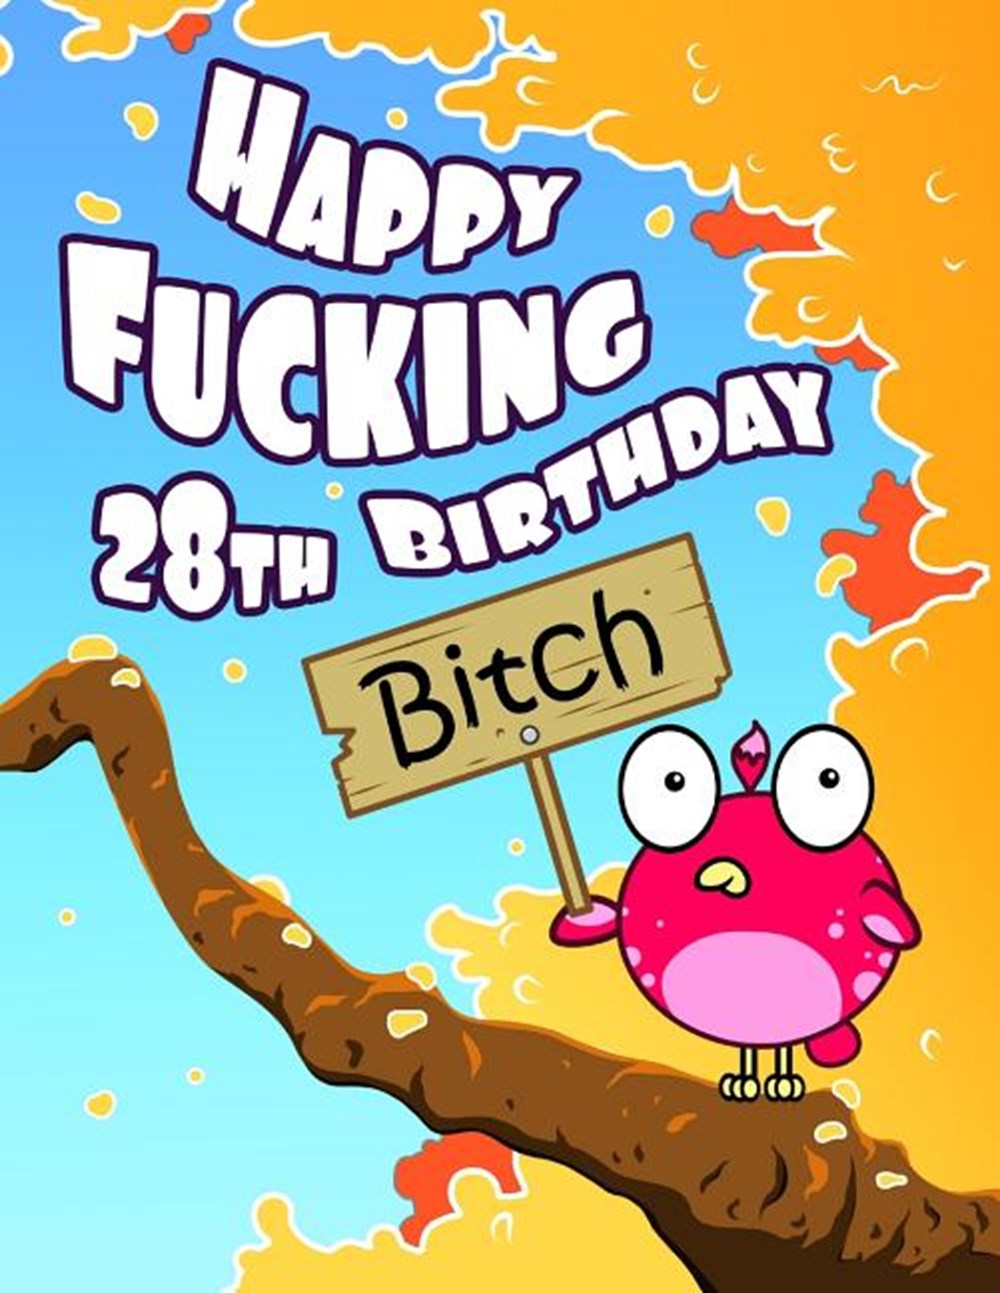 Happy Fucking 28th Birthday Bitch: Sweet Sprinkled with Sassy...Forget the Funny Birthday Card and G